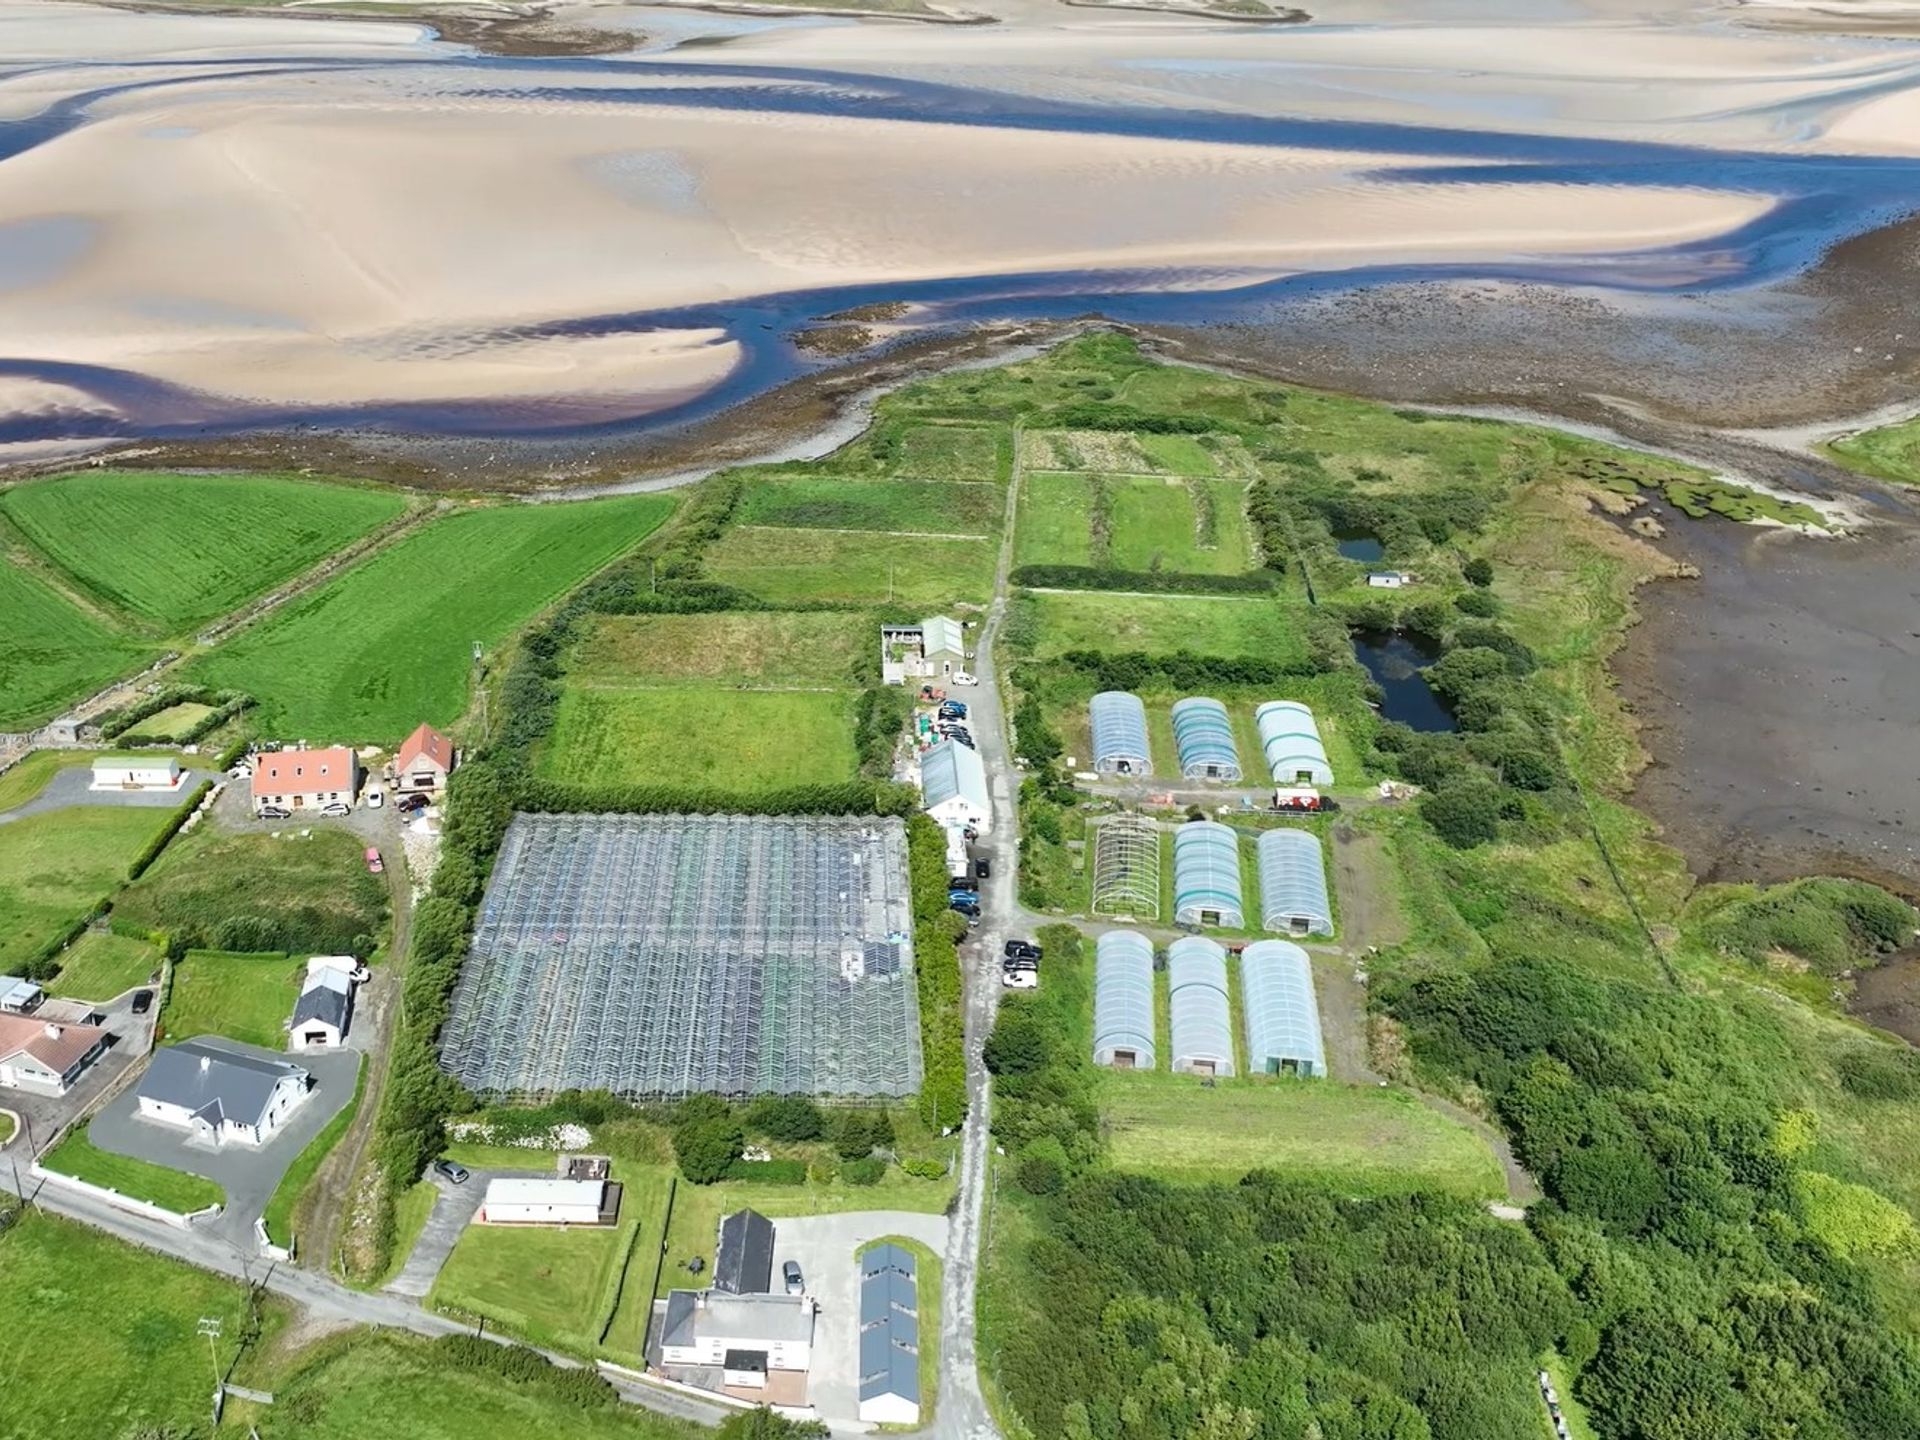 Given its special agri and coastal profile, the site is ideally placed to harness the bioeconomy as a central source of new jobs in rural and coastal areas focused on the growth of new markets.